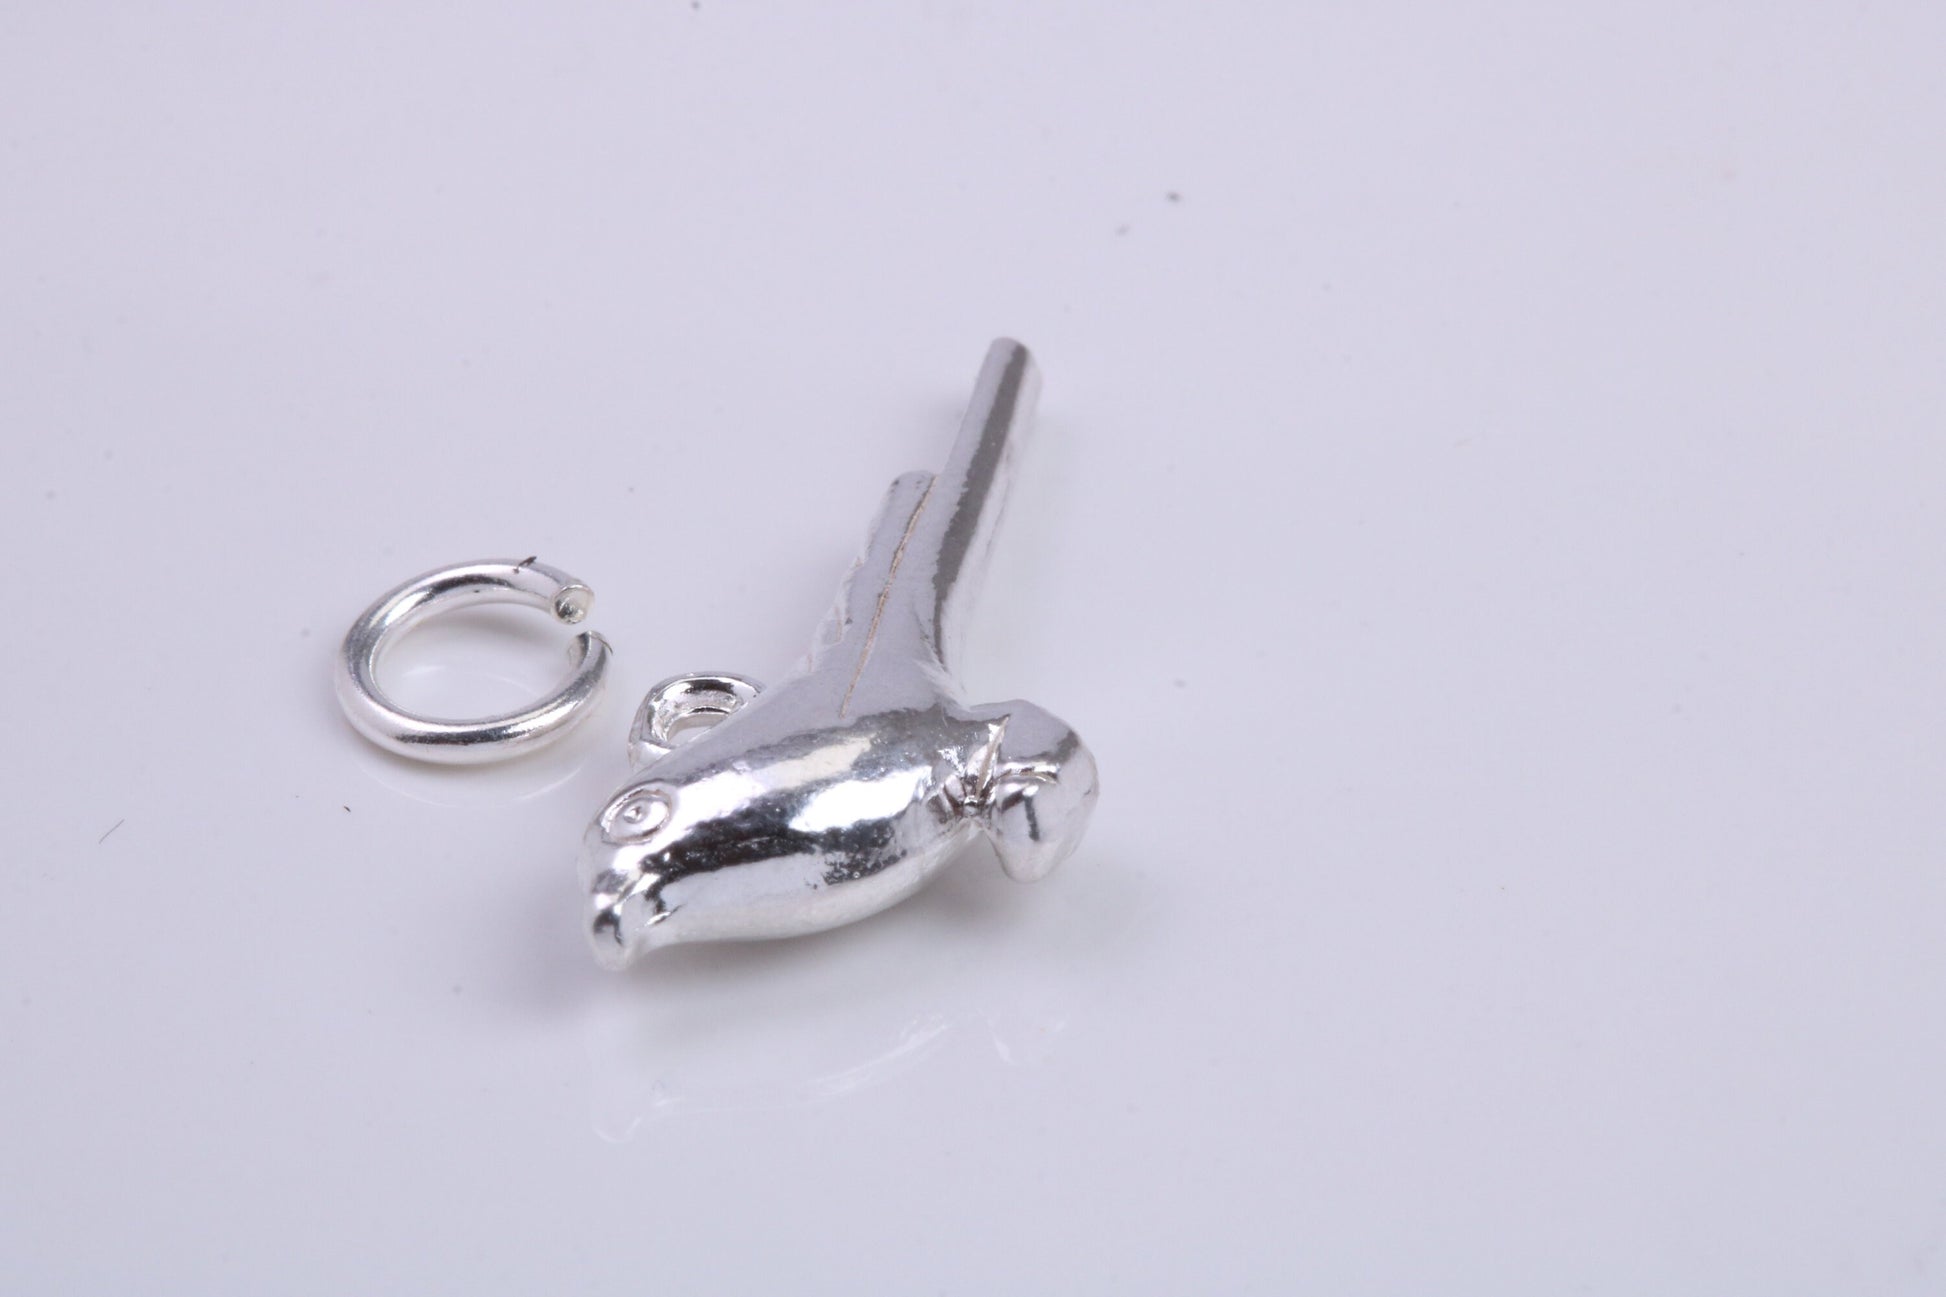 Long Tailed Bird Charm, Traditional Charm, Made from Solid 925 Grade Sterling Silver, Complete with Attachment Link